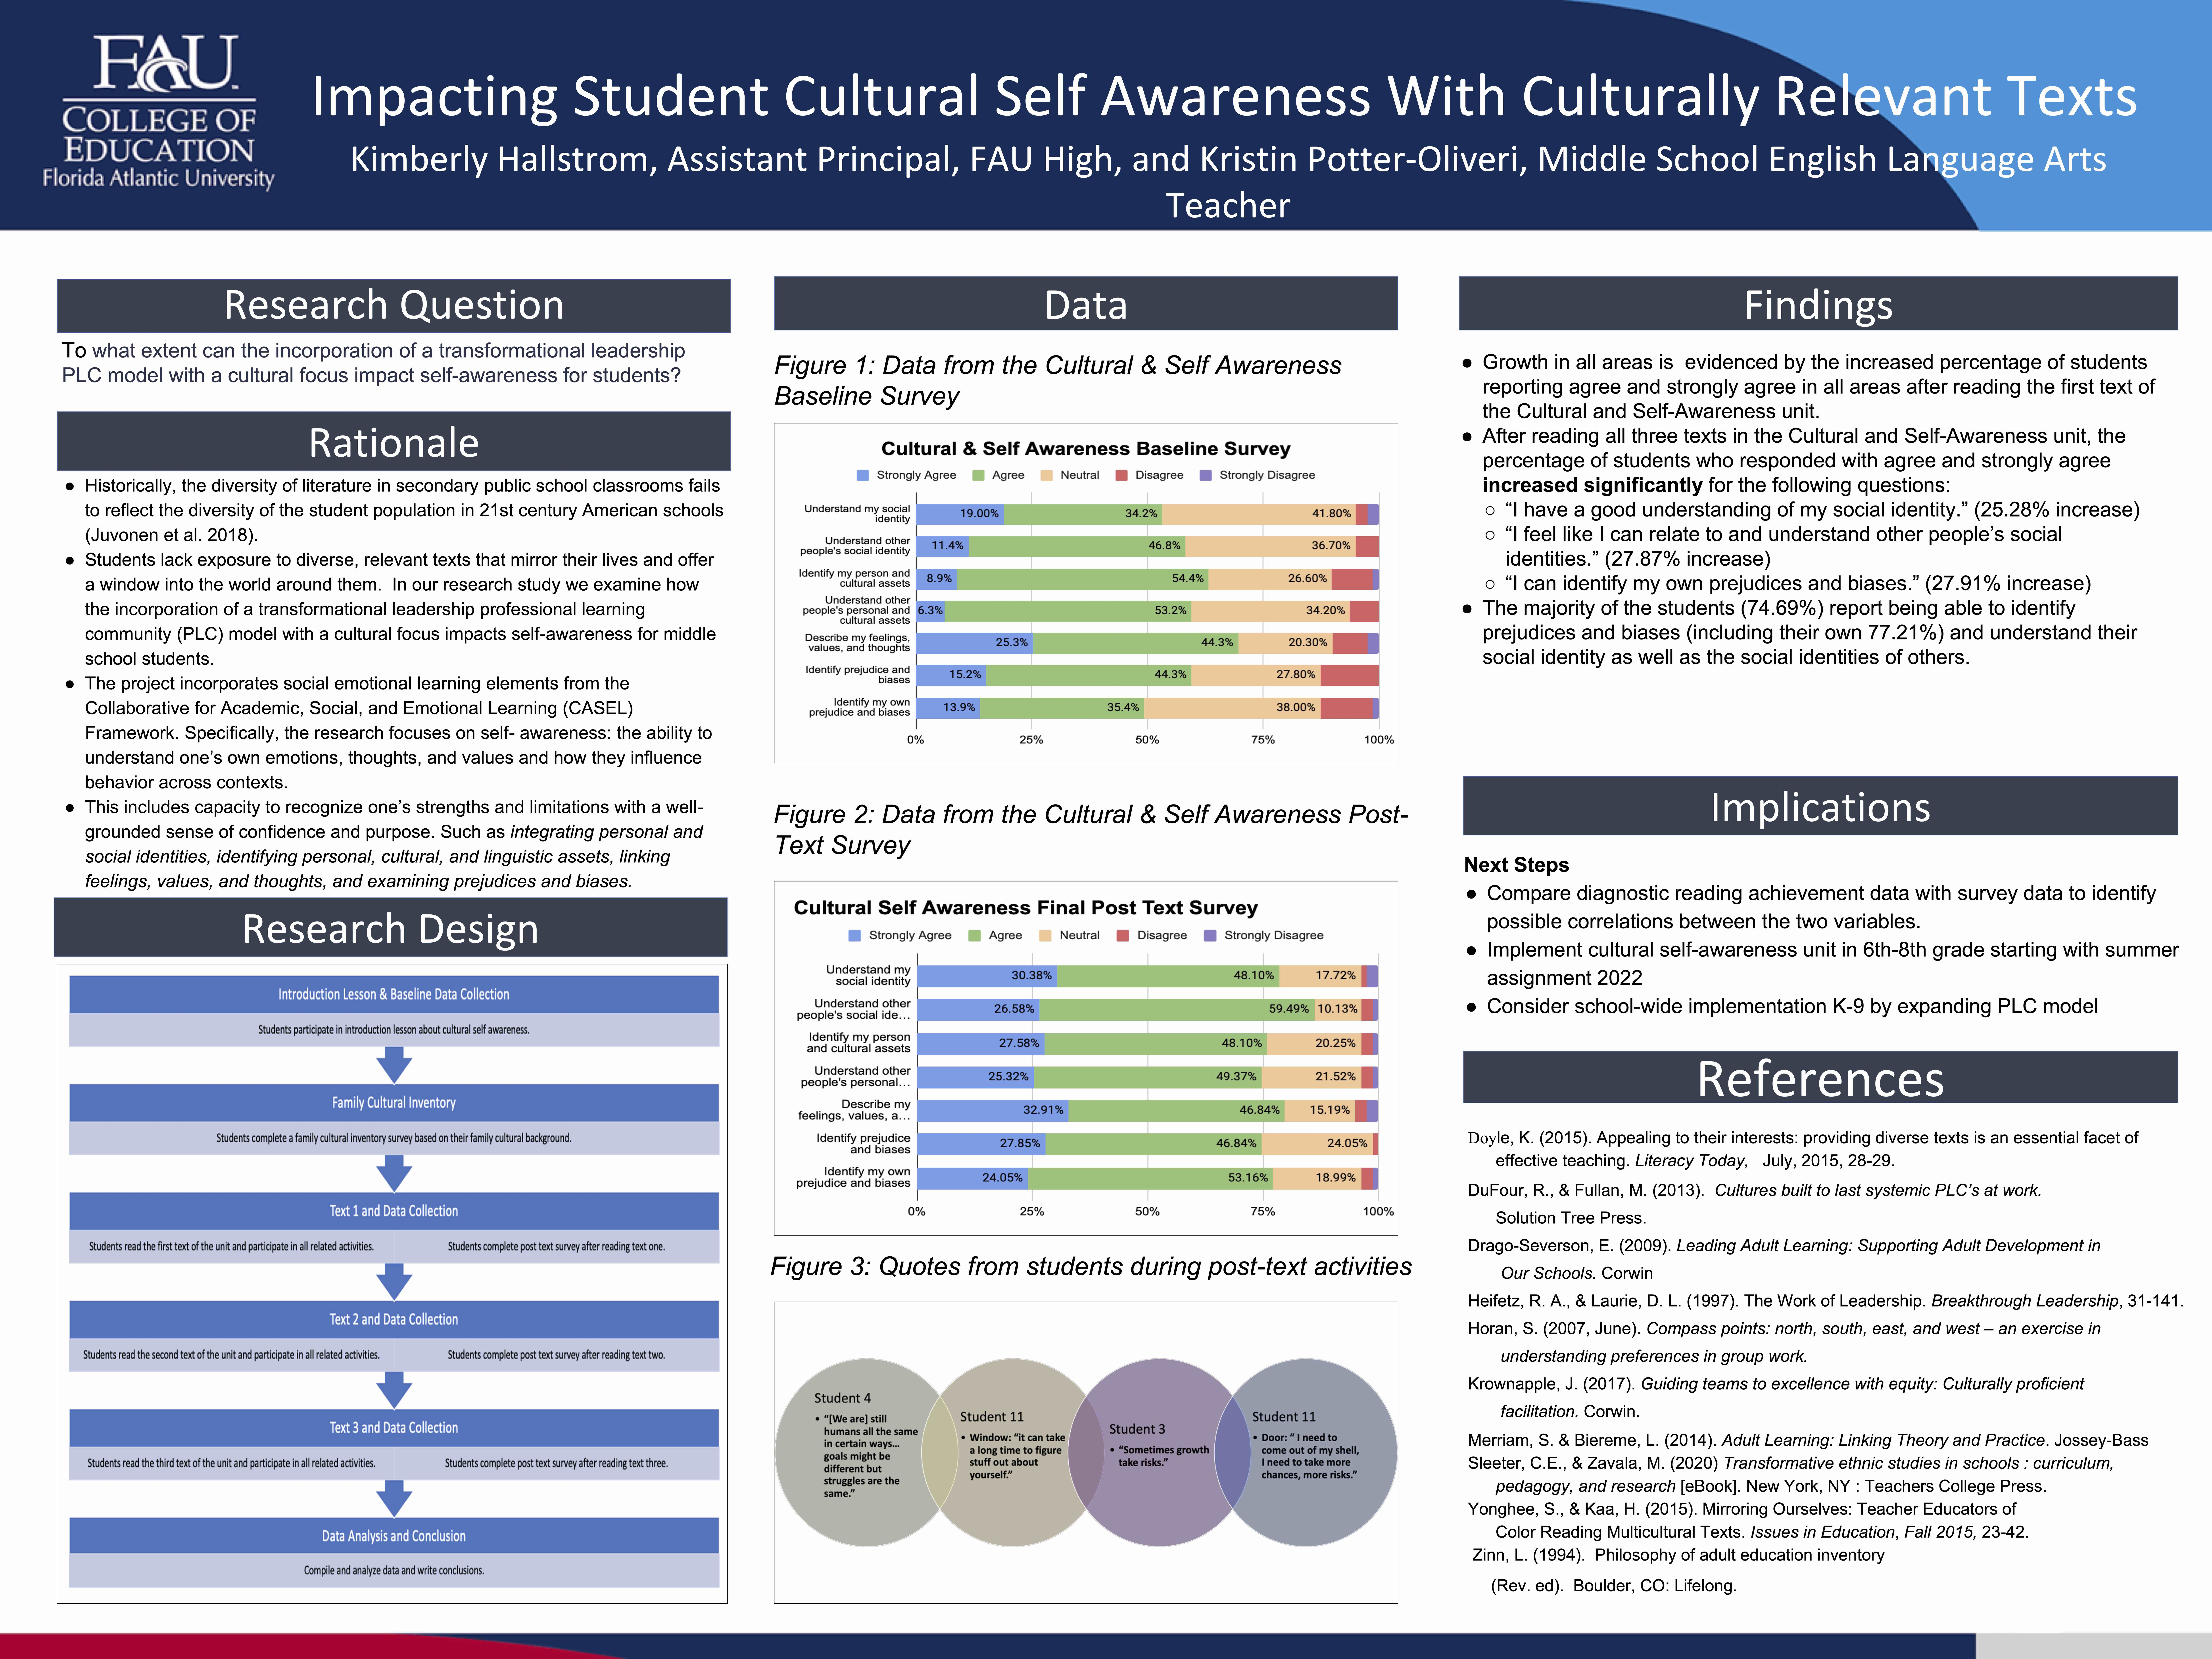 Impacting Student Cultural Self Awareness with Culturally Relevant Texts Presentation Poster